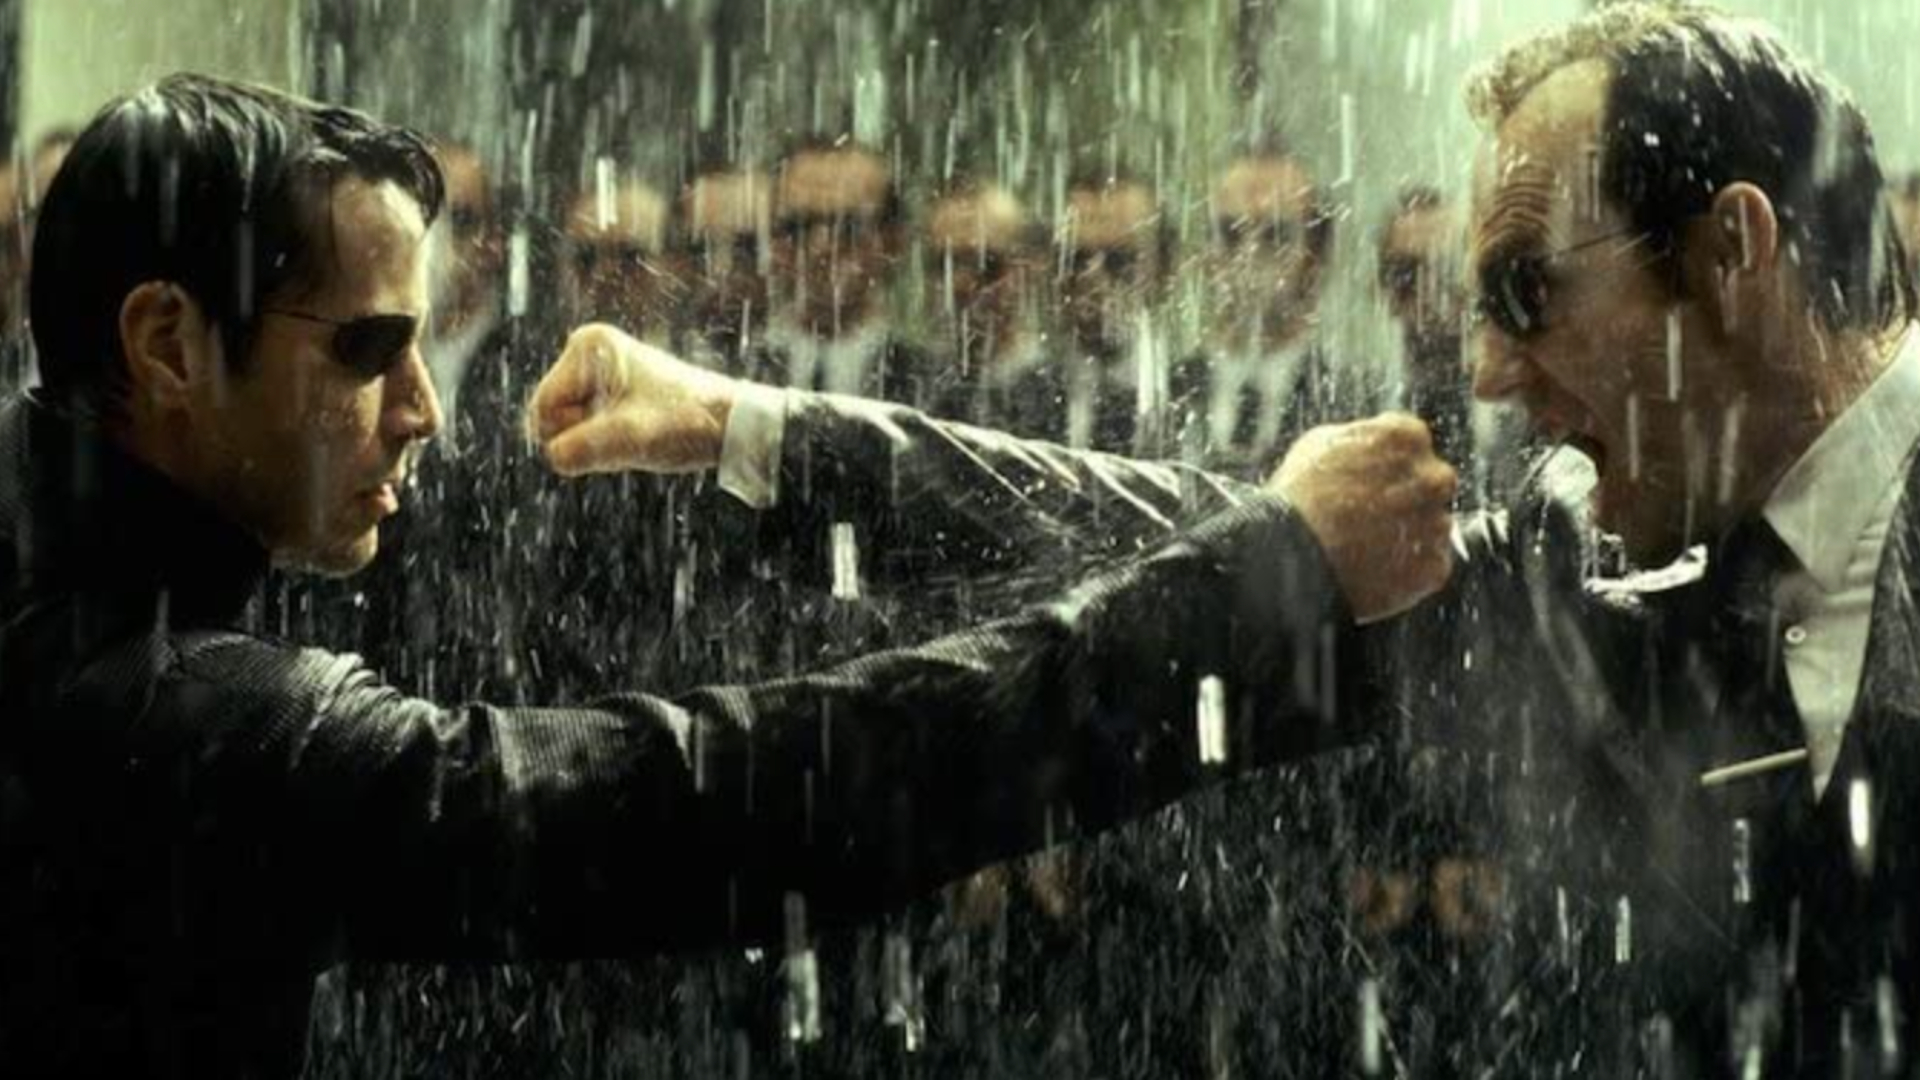 A still from The Matrix Revolutions movie showing two men fighting in the rain. On the left we see Neo, wearing a black trench coat and sunglasses with this right arm outstretched in a punch. On the right is Agent Smith, wearing a suit and sunglasses, with his right arm outstretched in a punch. In the background you can see an army of Agent Smiths.